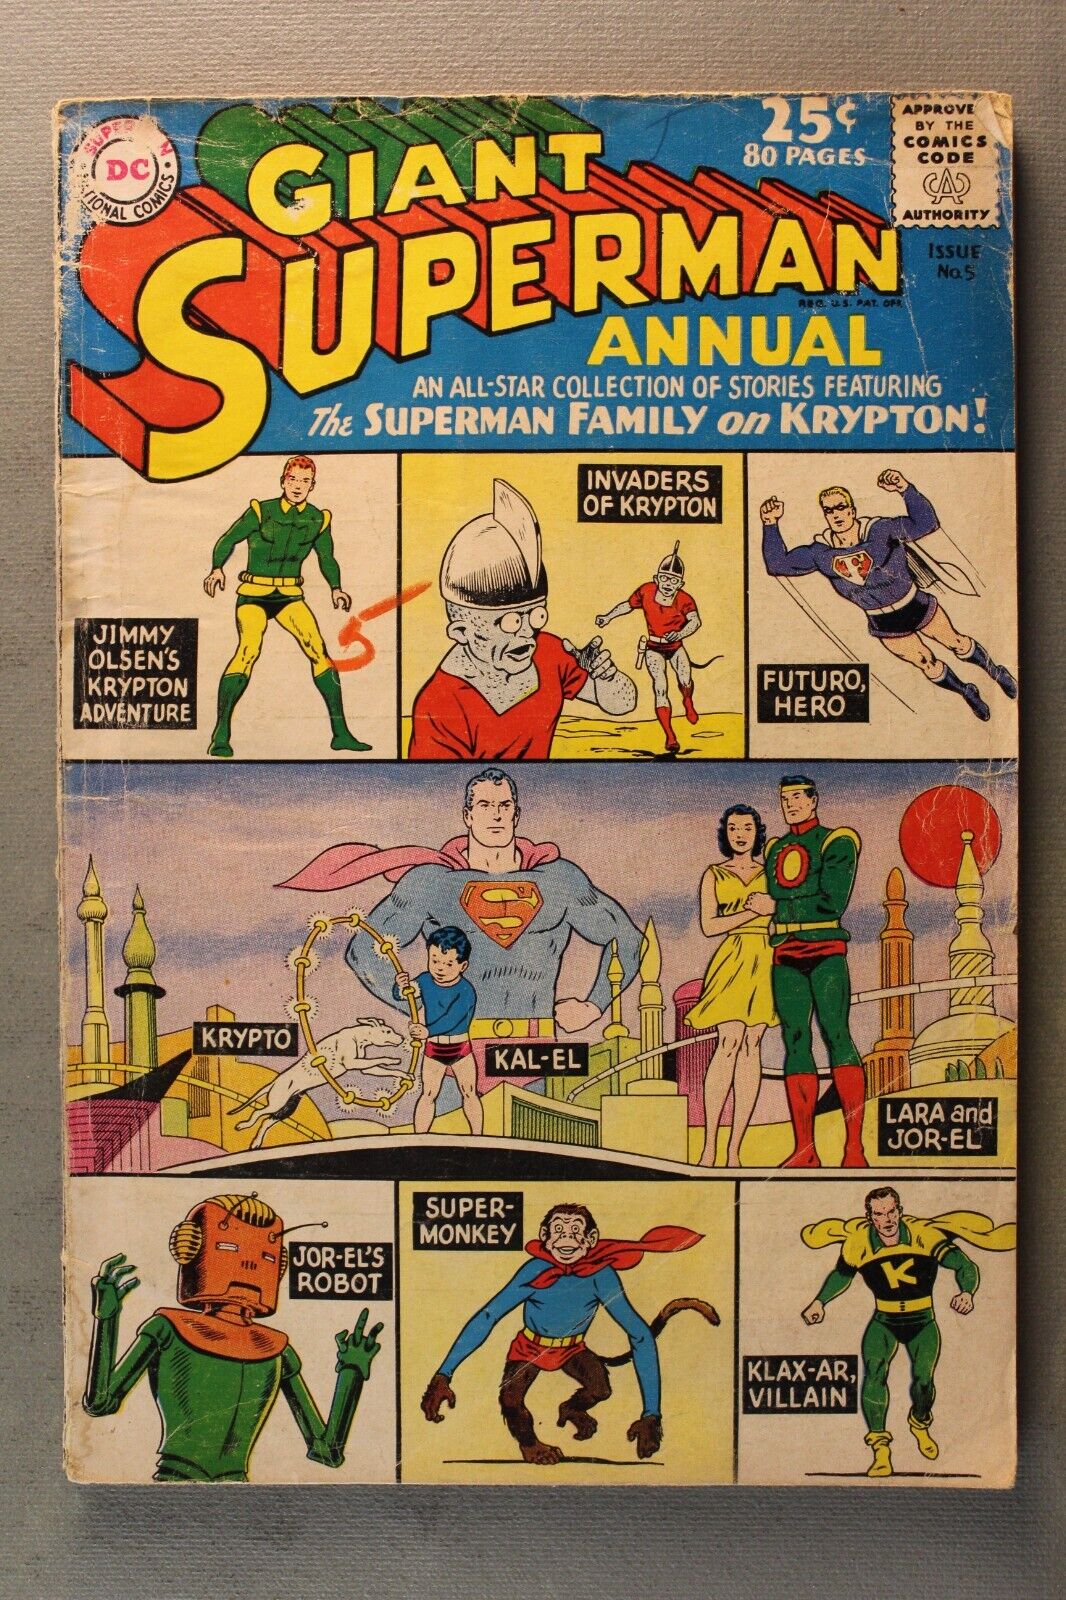 GIANT SUPERMAN ANNUAL ISSUE No. 5 ~ 80 Pages ~ Spine Damage, Worn, Inside good.